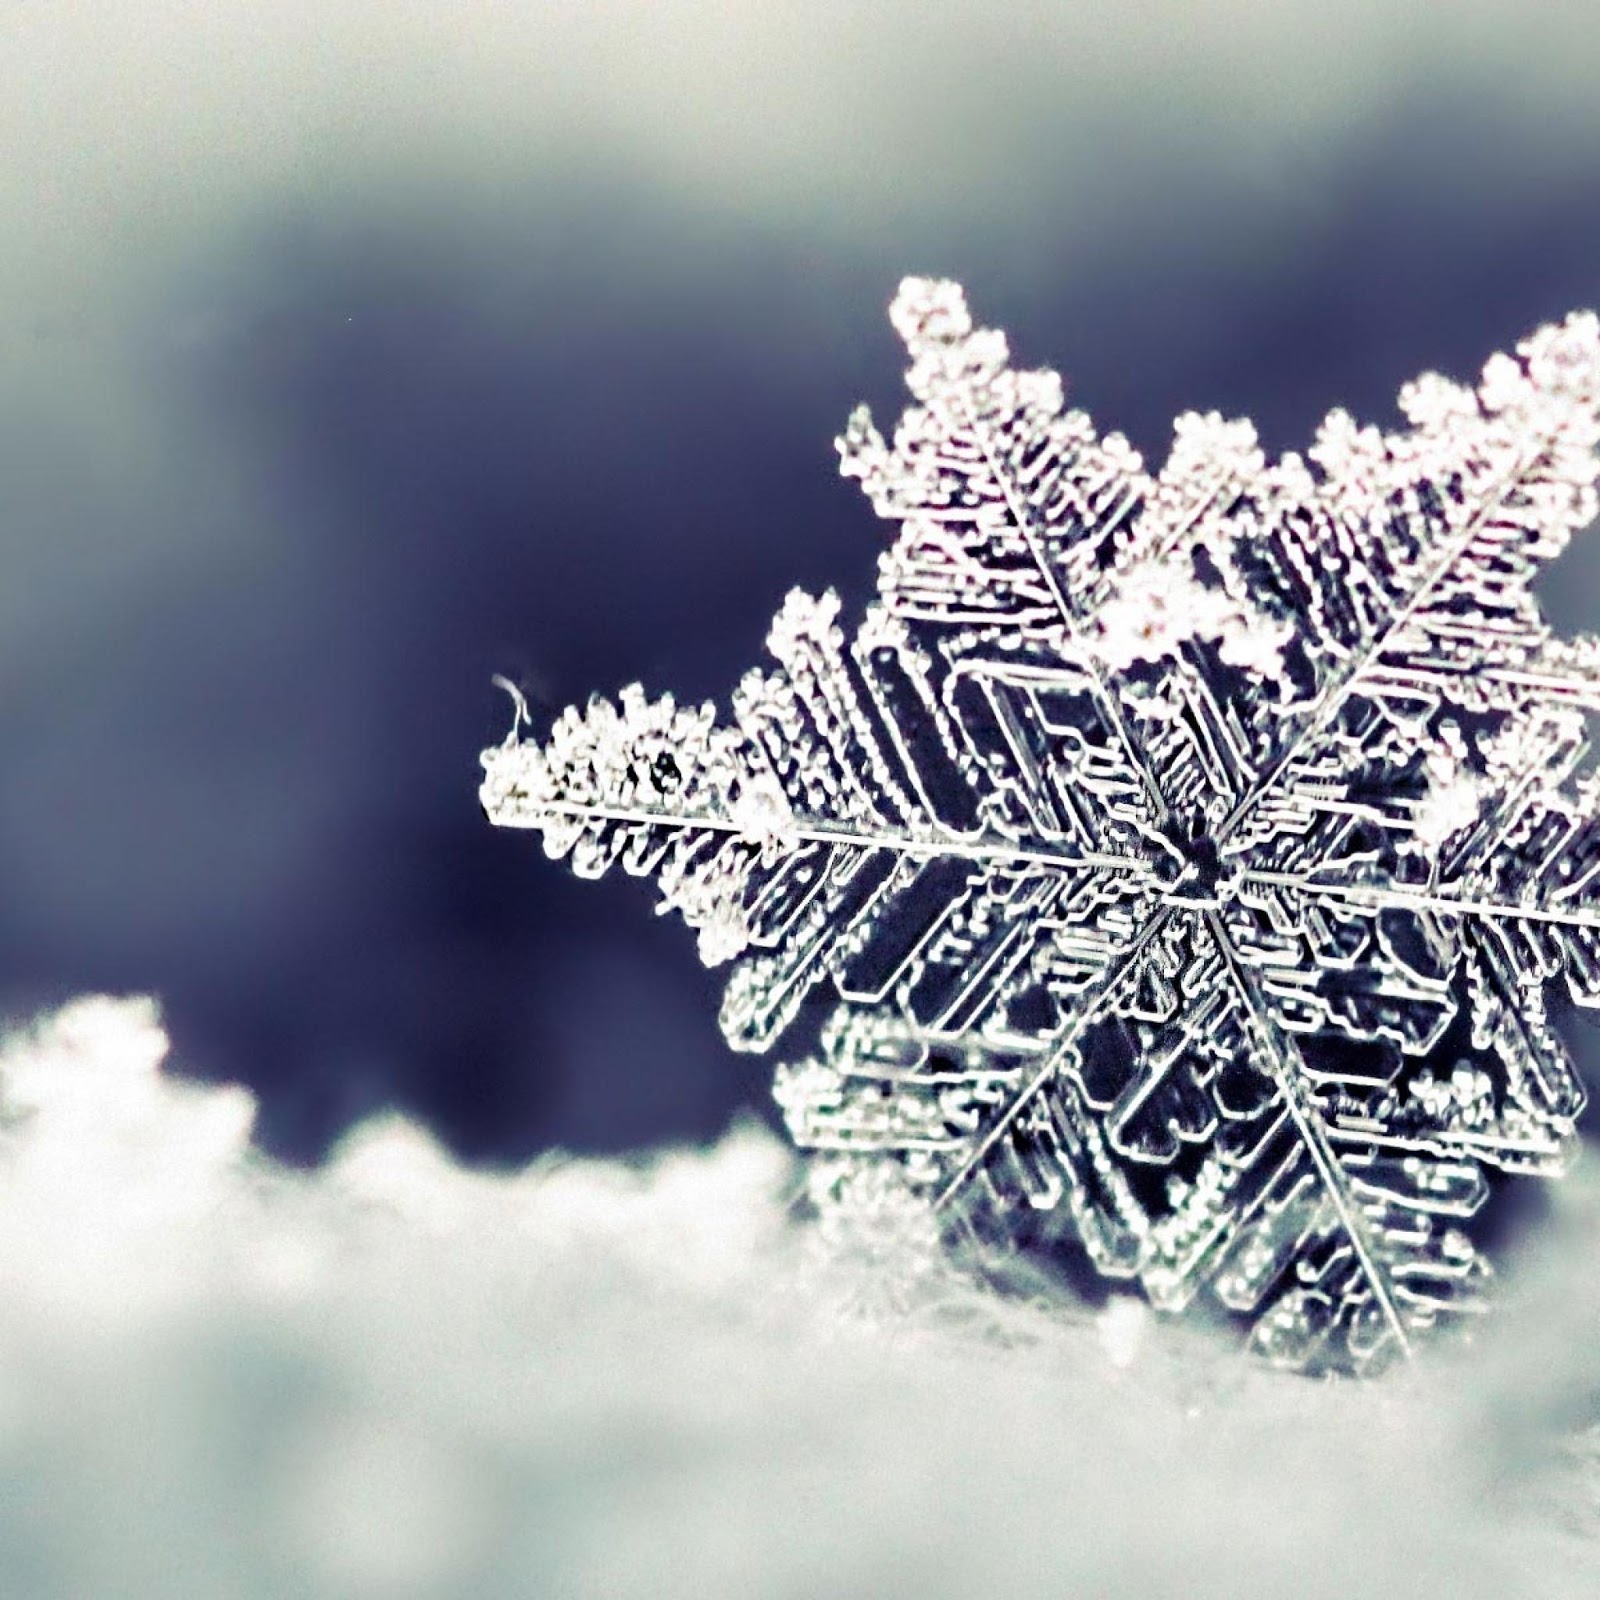 Winter Themed HD Wallpaper For iPad Gadgets Apps And Flash Games